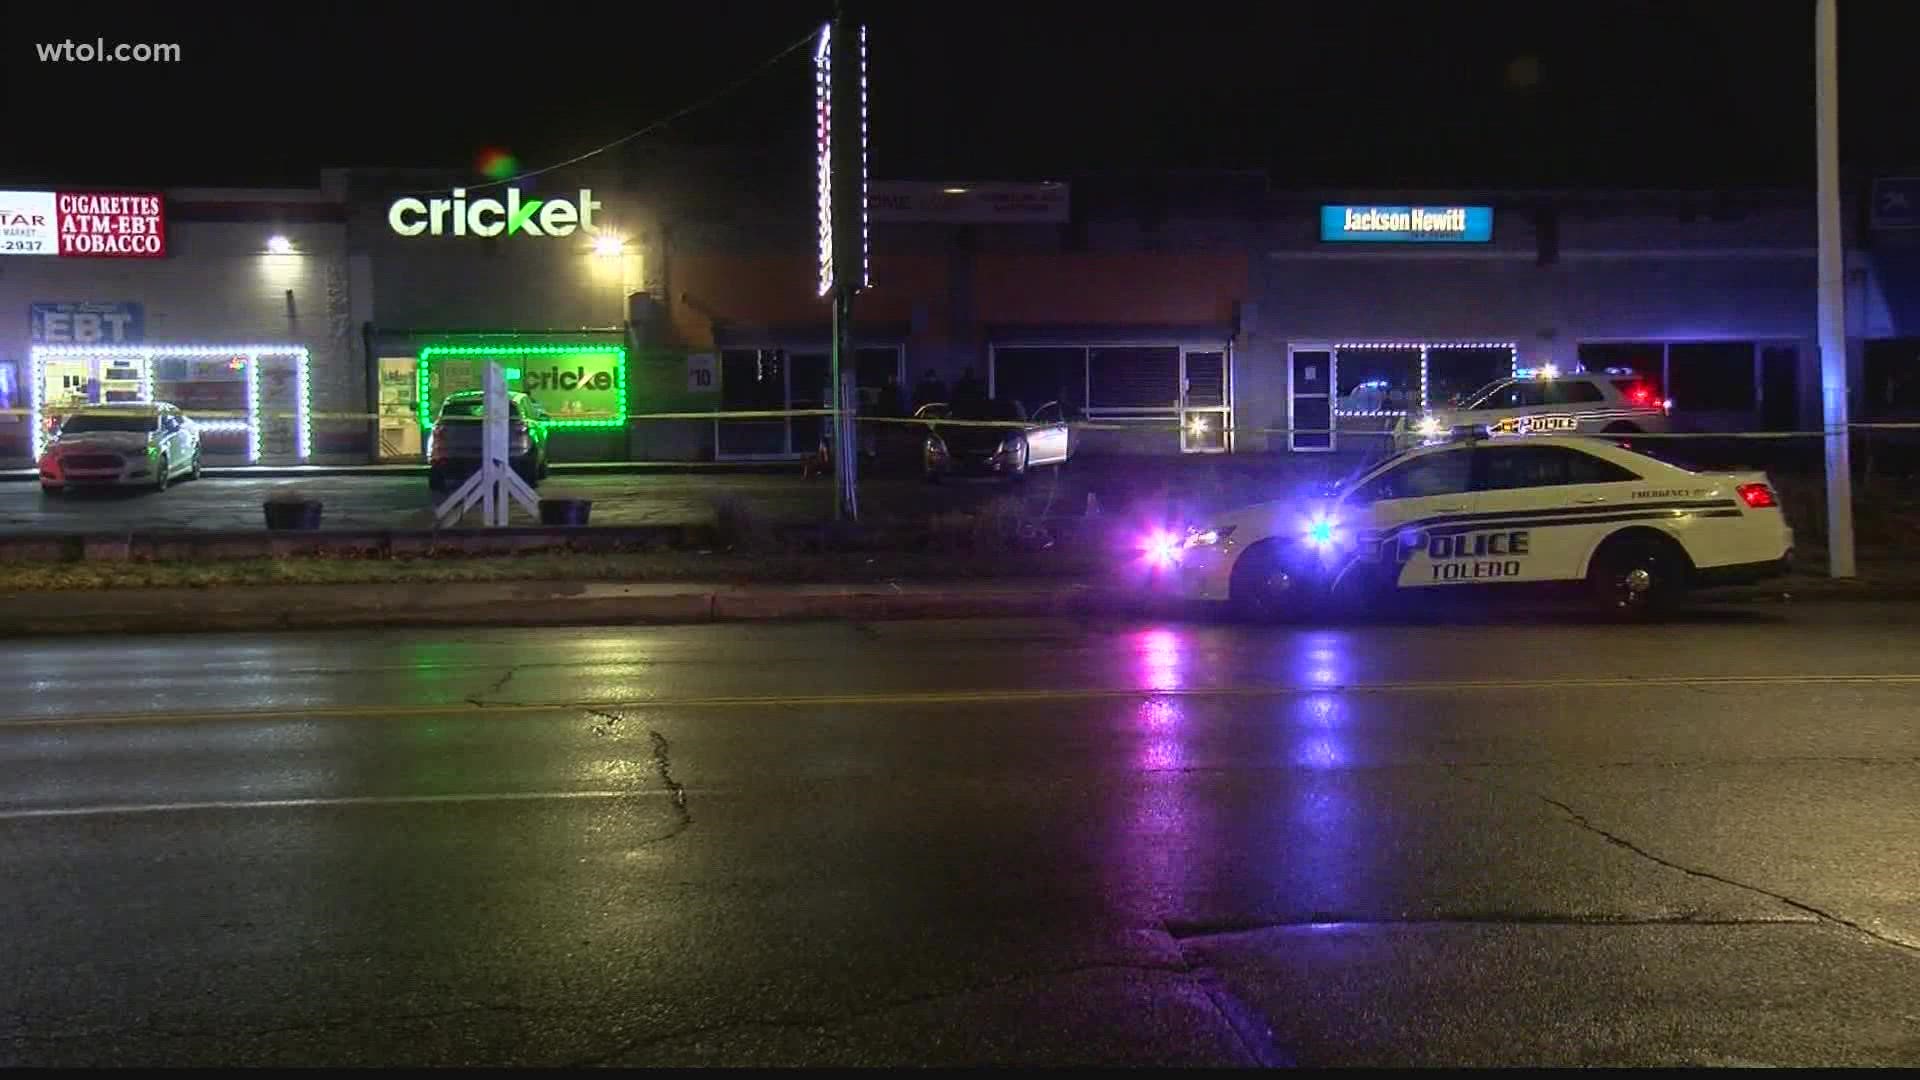 Toledo police say the man was found shot at least one time in a vehicle in the parking lot of a shopping plaza on Broadway St. near South Ave. around 6 p.m.